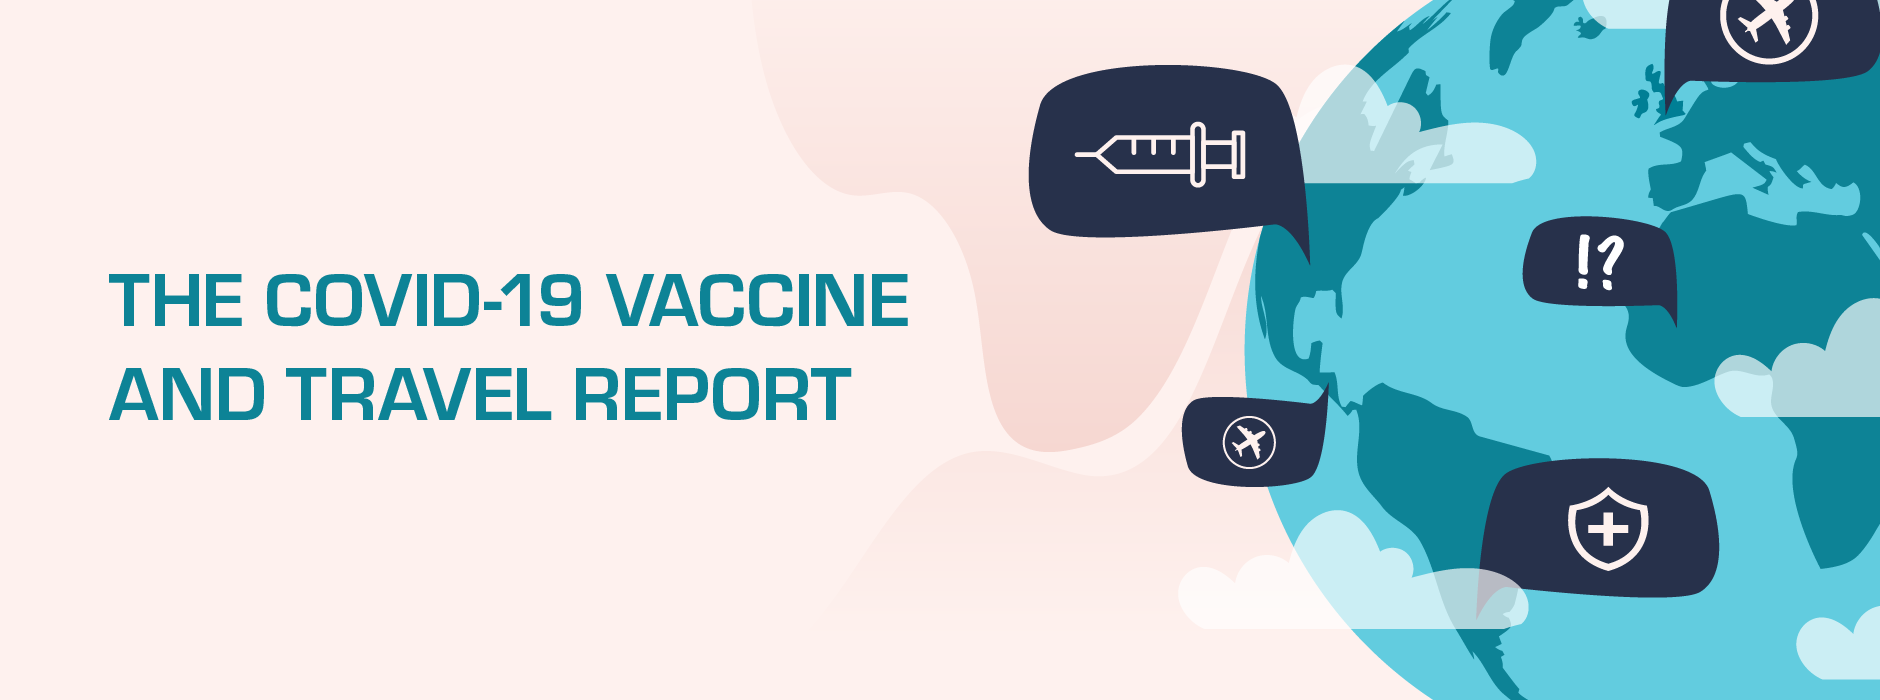 Header - The COVID-19 Vaccine and Travel Report